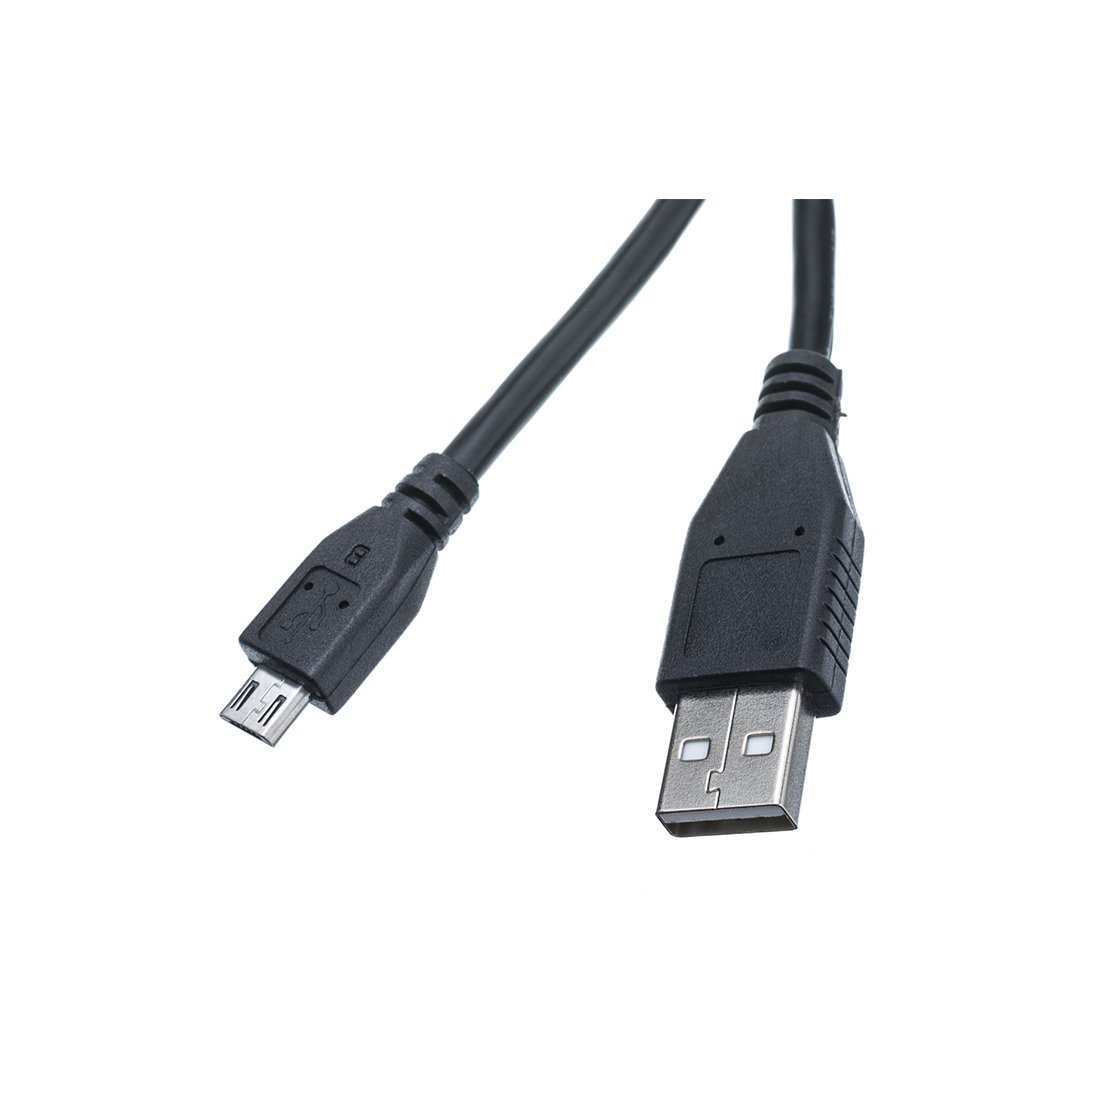 CAB-USB-MICROB-3 2.0 Cable, Type A to Micro B,